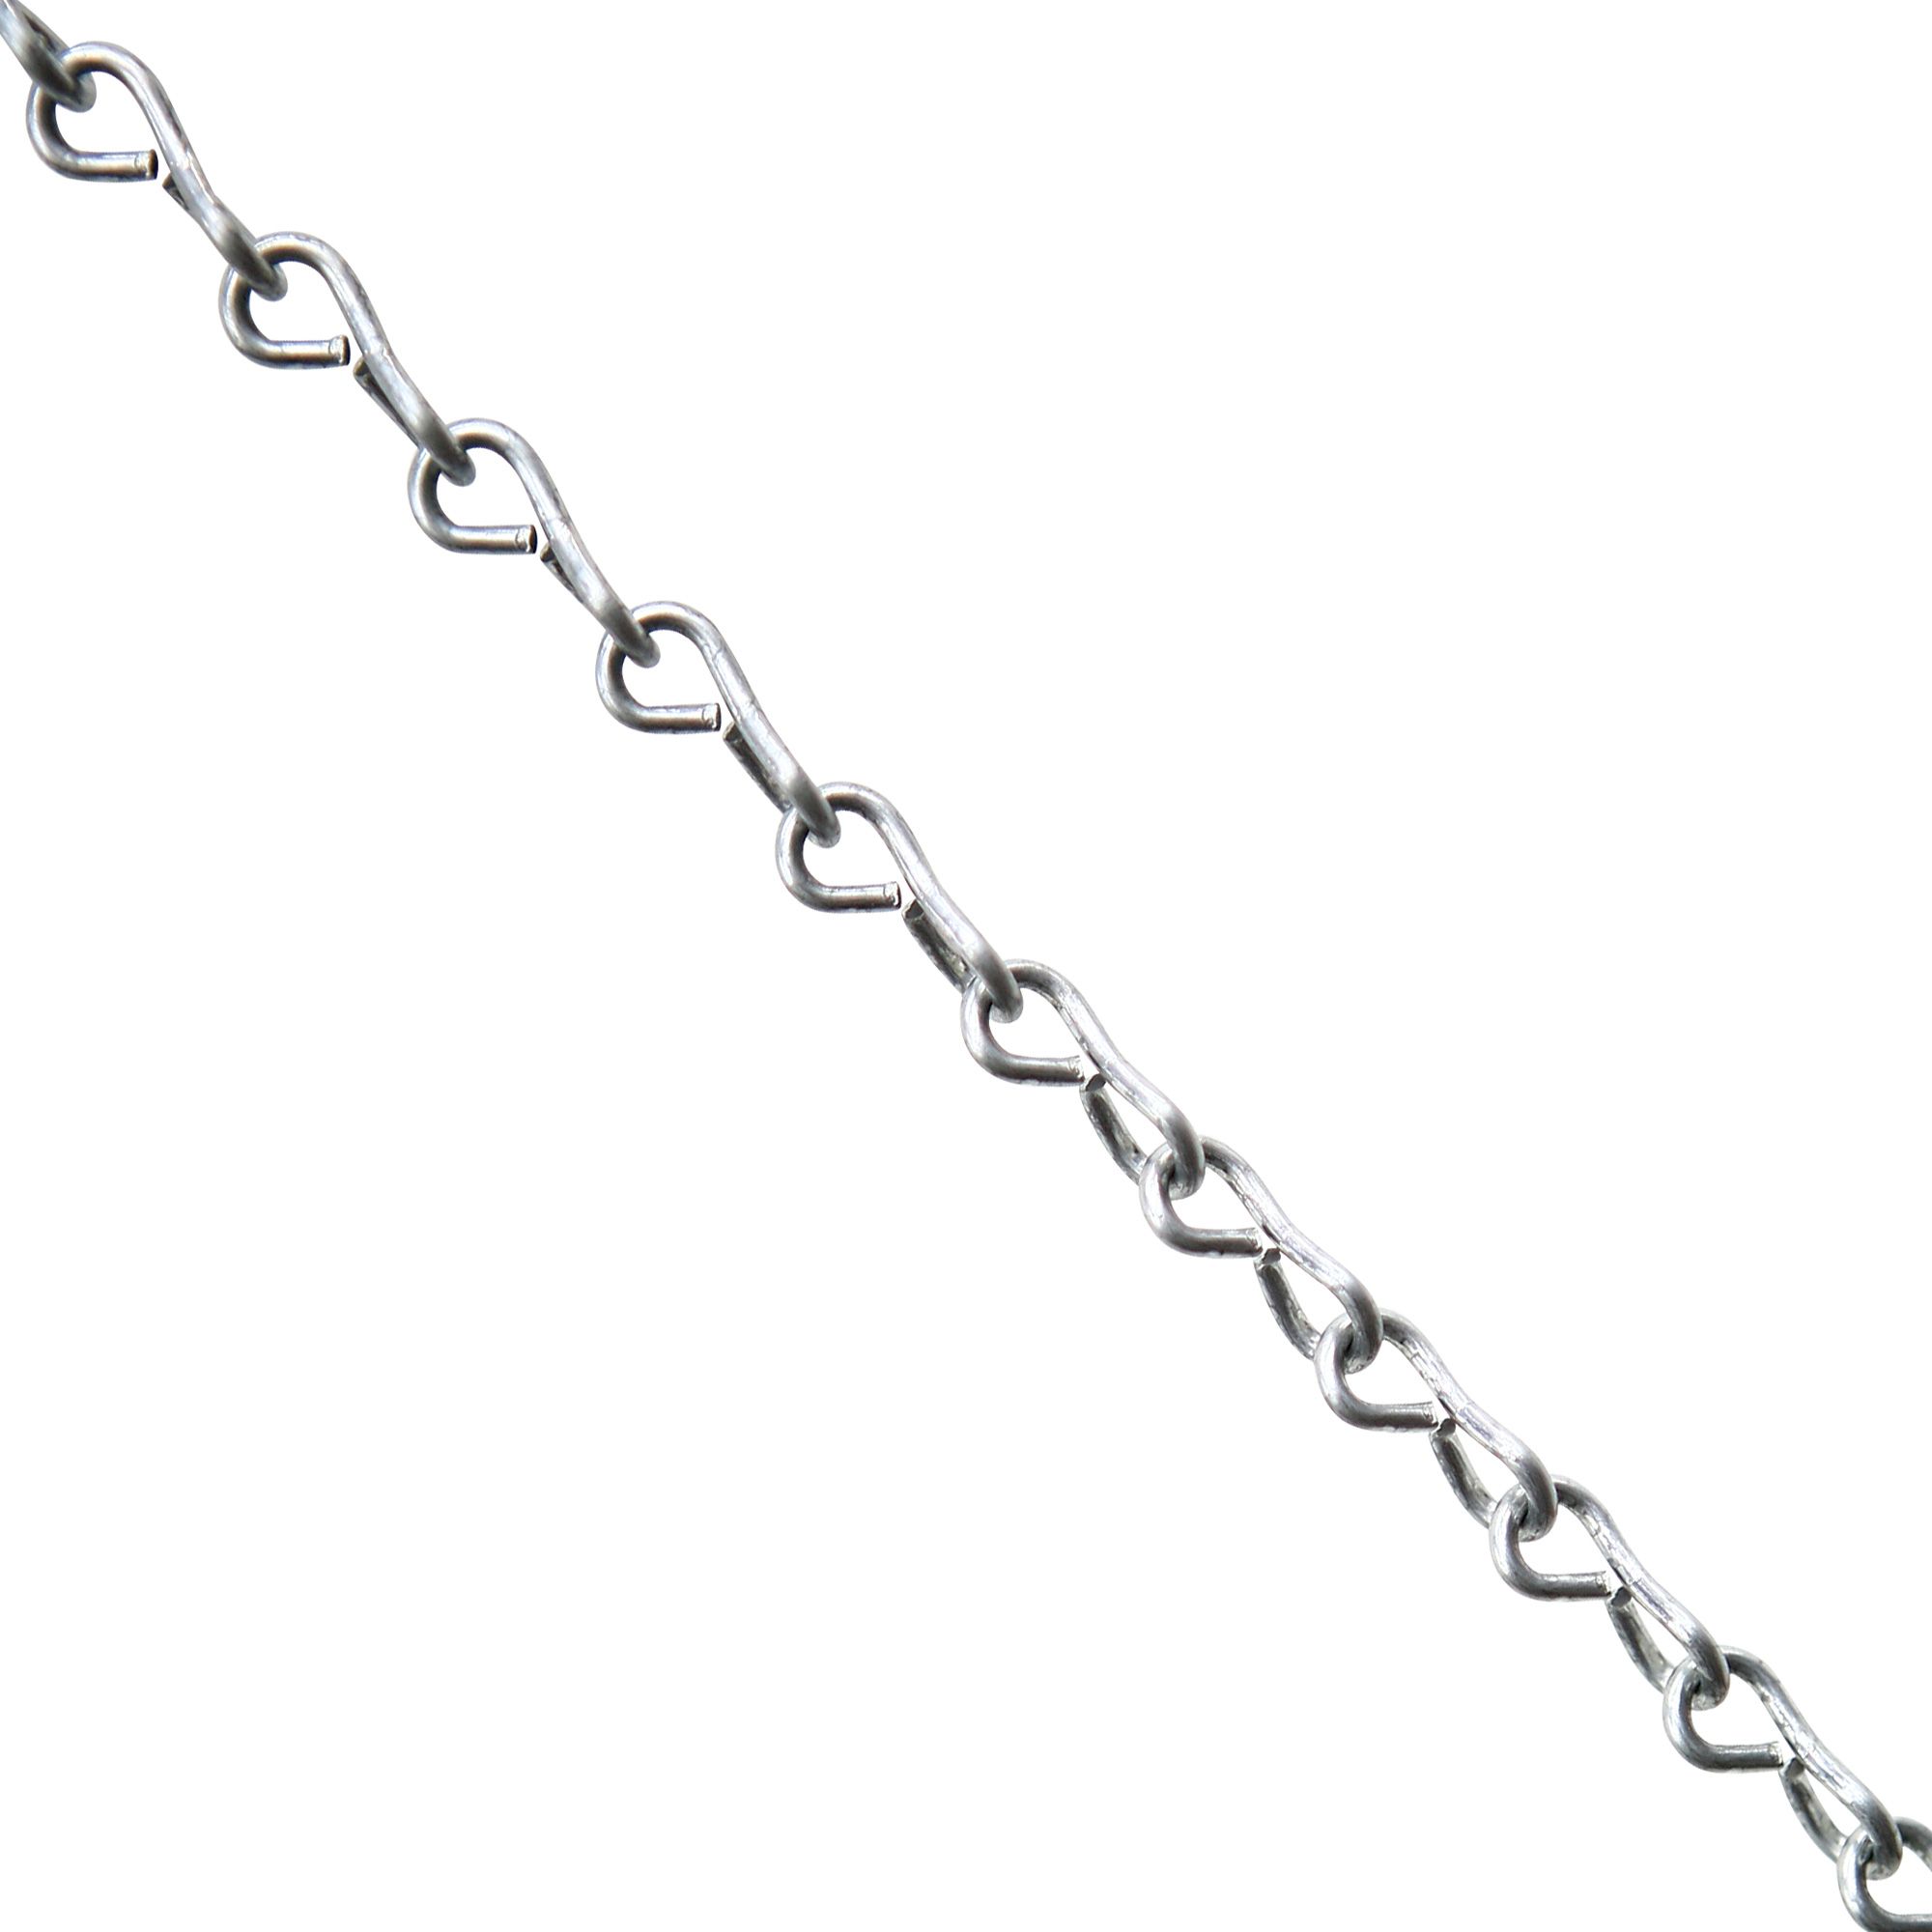 Stainless Steel 100 ft Box #10 Single Jack Chain 